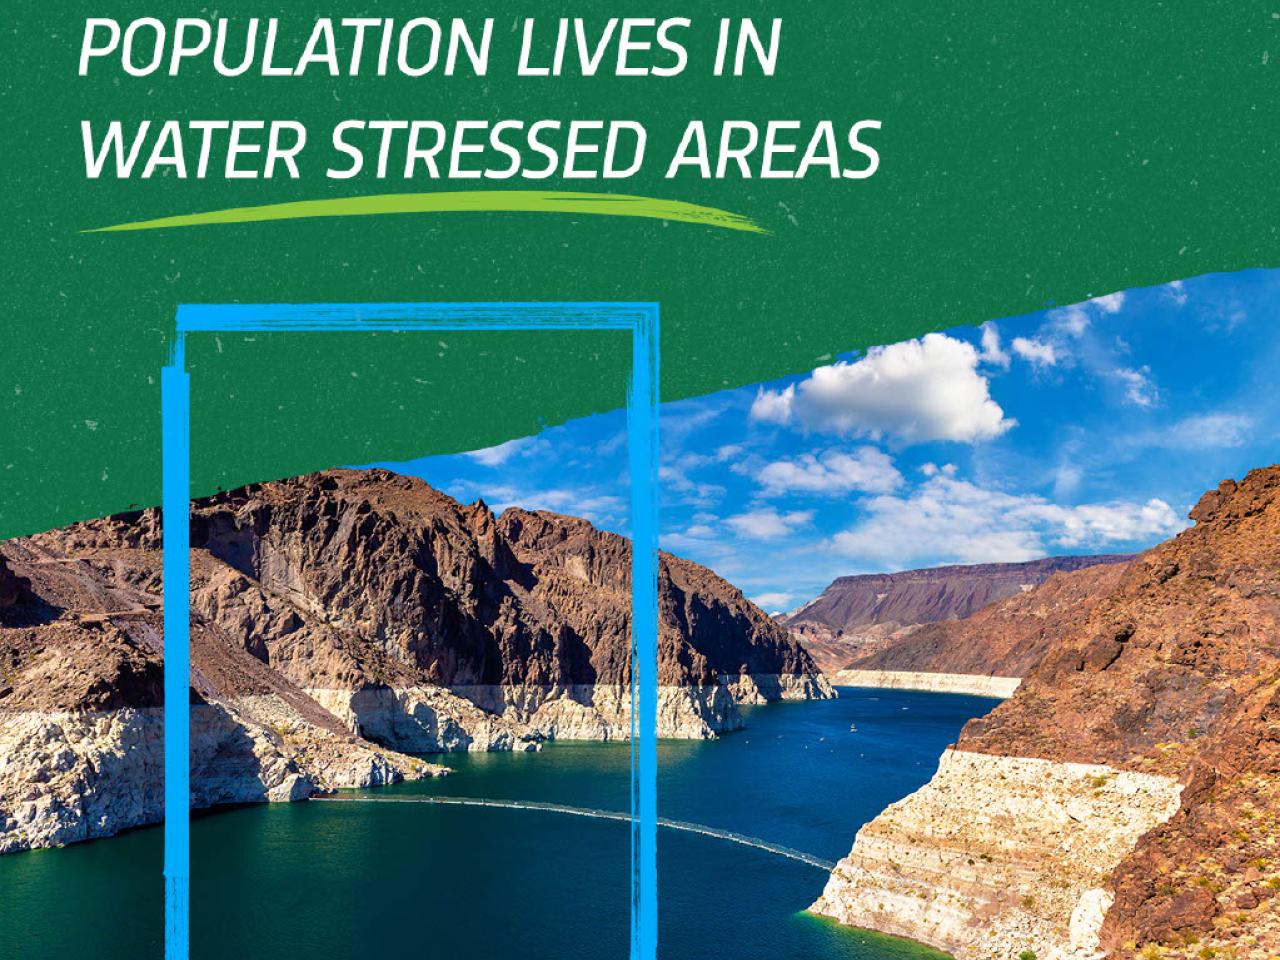 25% of the world's population lives in water stressed areas